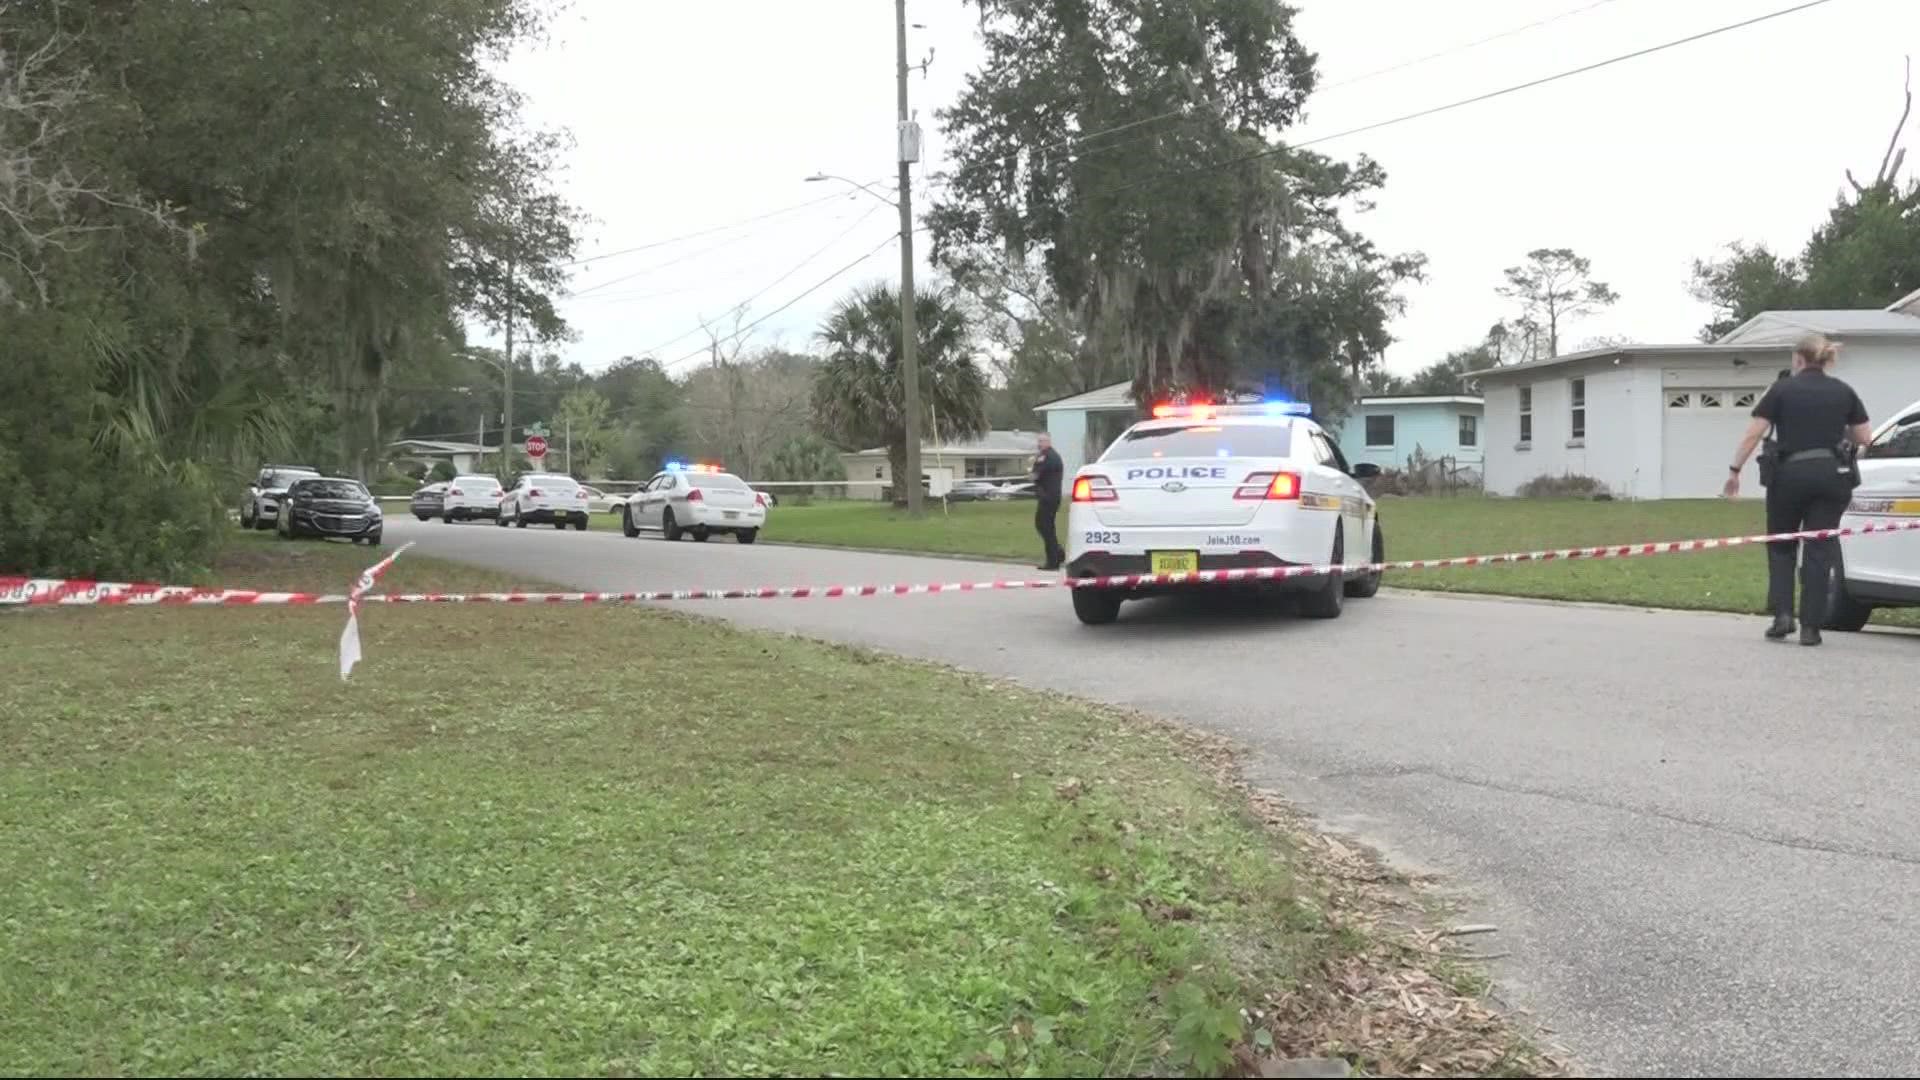 A man is dead and another is in life-threatening condition after an officer-involved shooting on the Westside Monday, according to the Jacksonville Sheriff's Office.